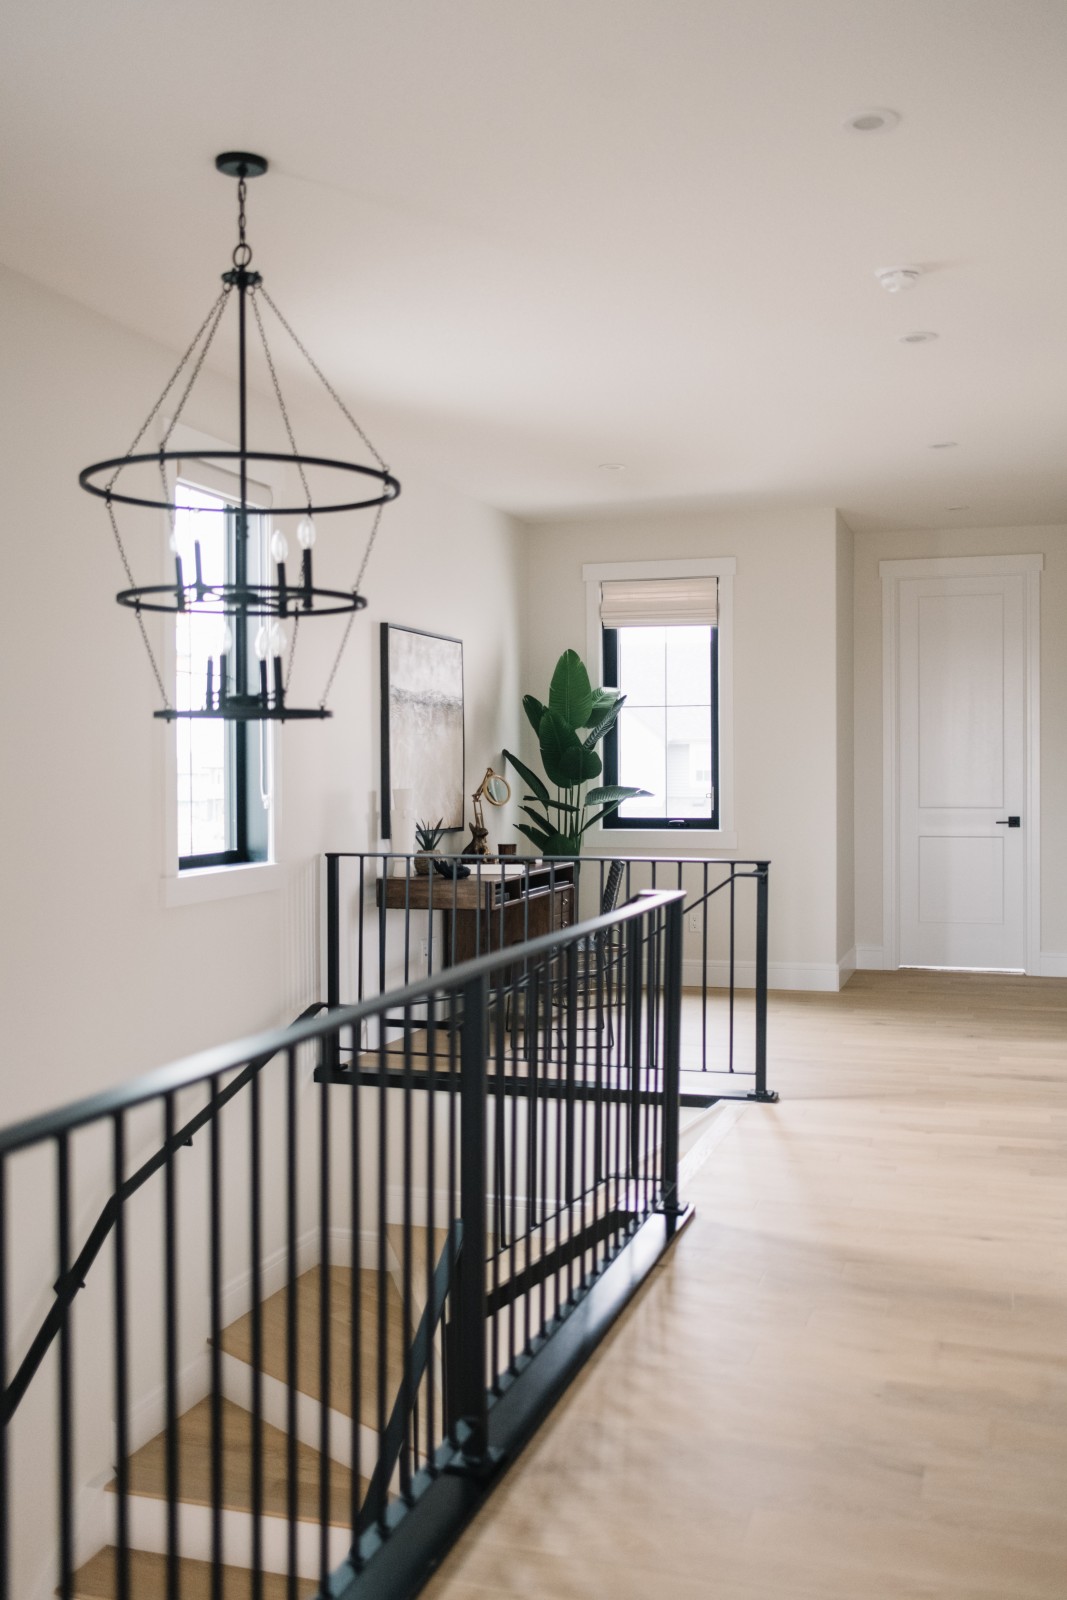 A large black, tiered chandelier hangs above the stairwell leading up to the second floor of the Kalliope showhome complimenting the iron railing. Hardwood floors of the second floor hallway lead to the office nook located at the top of the stairs